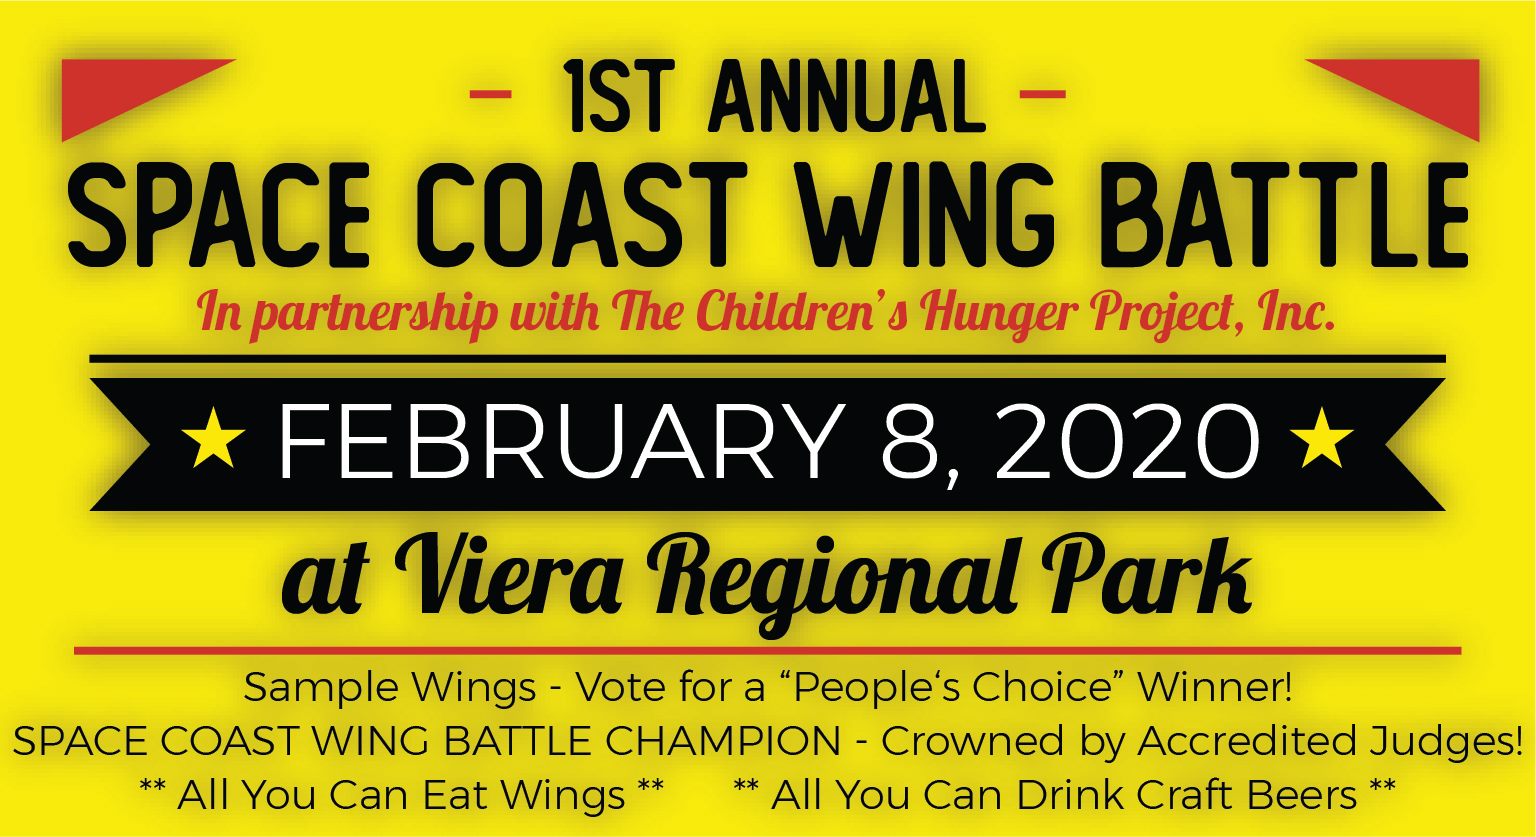 1st Annual Space Coast Wing Battle